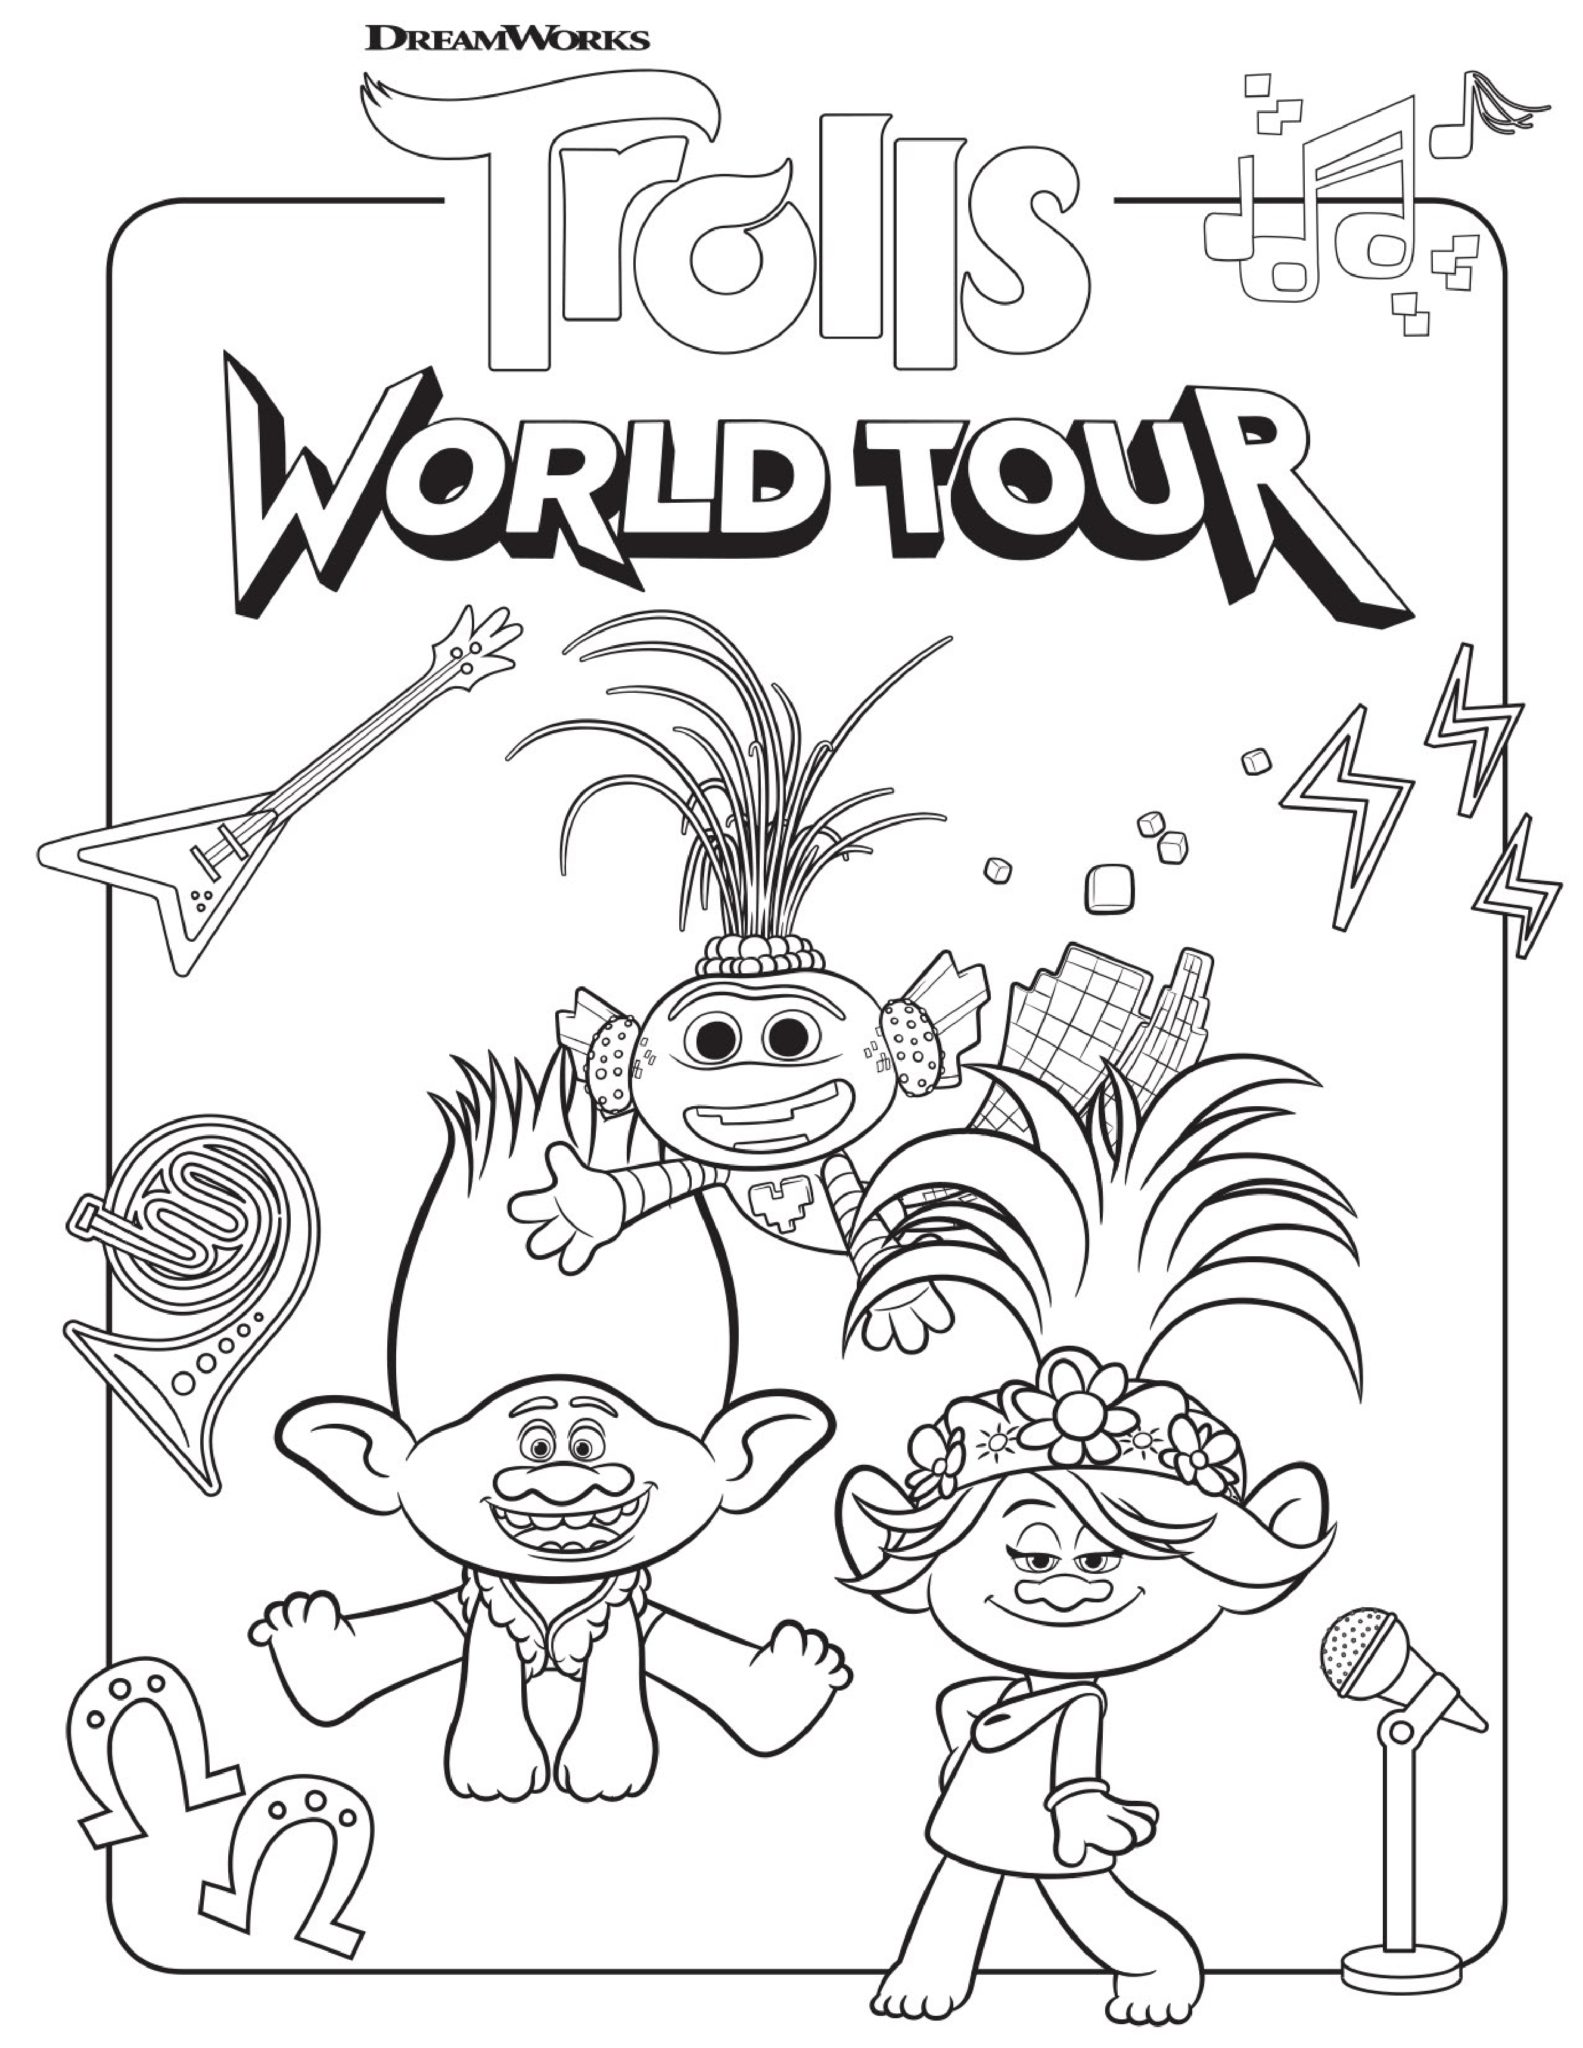 Trolls World Tour Coloring Page